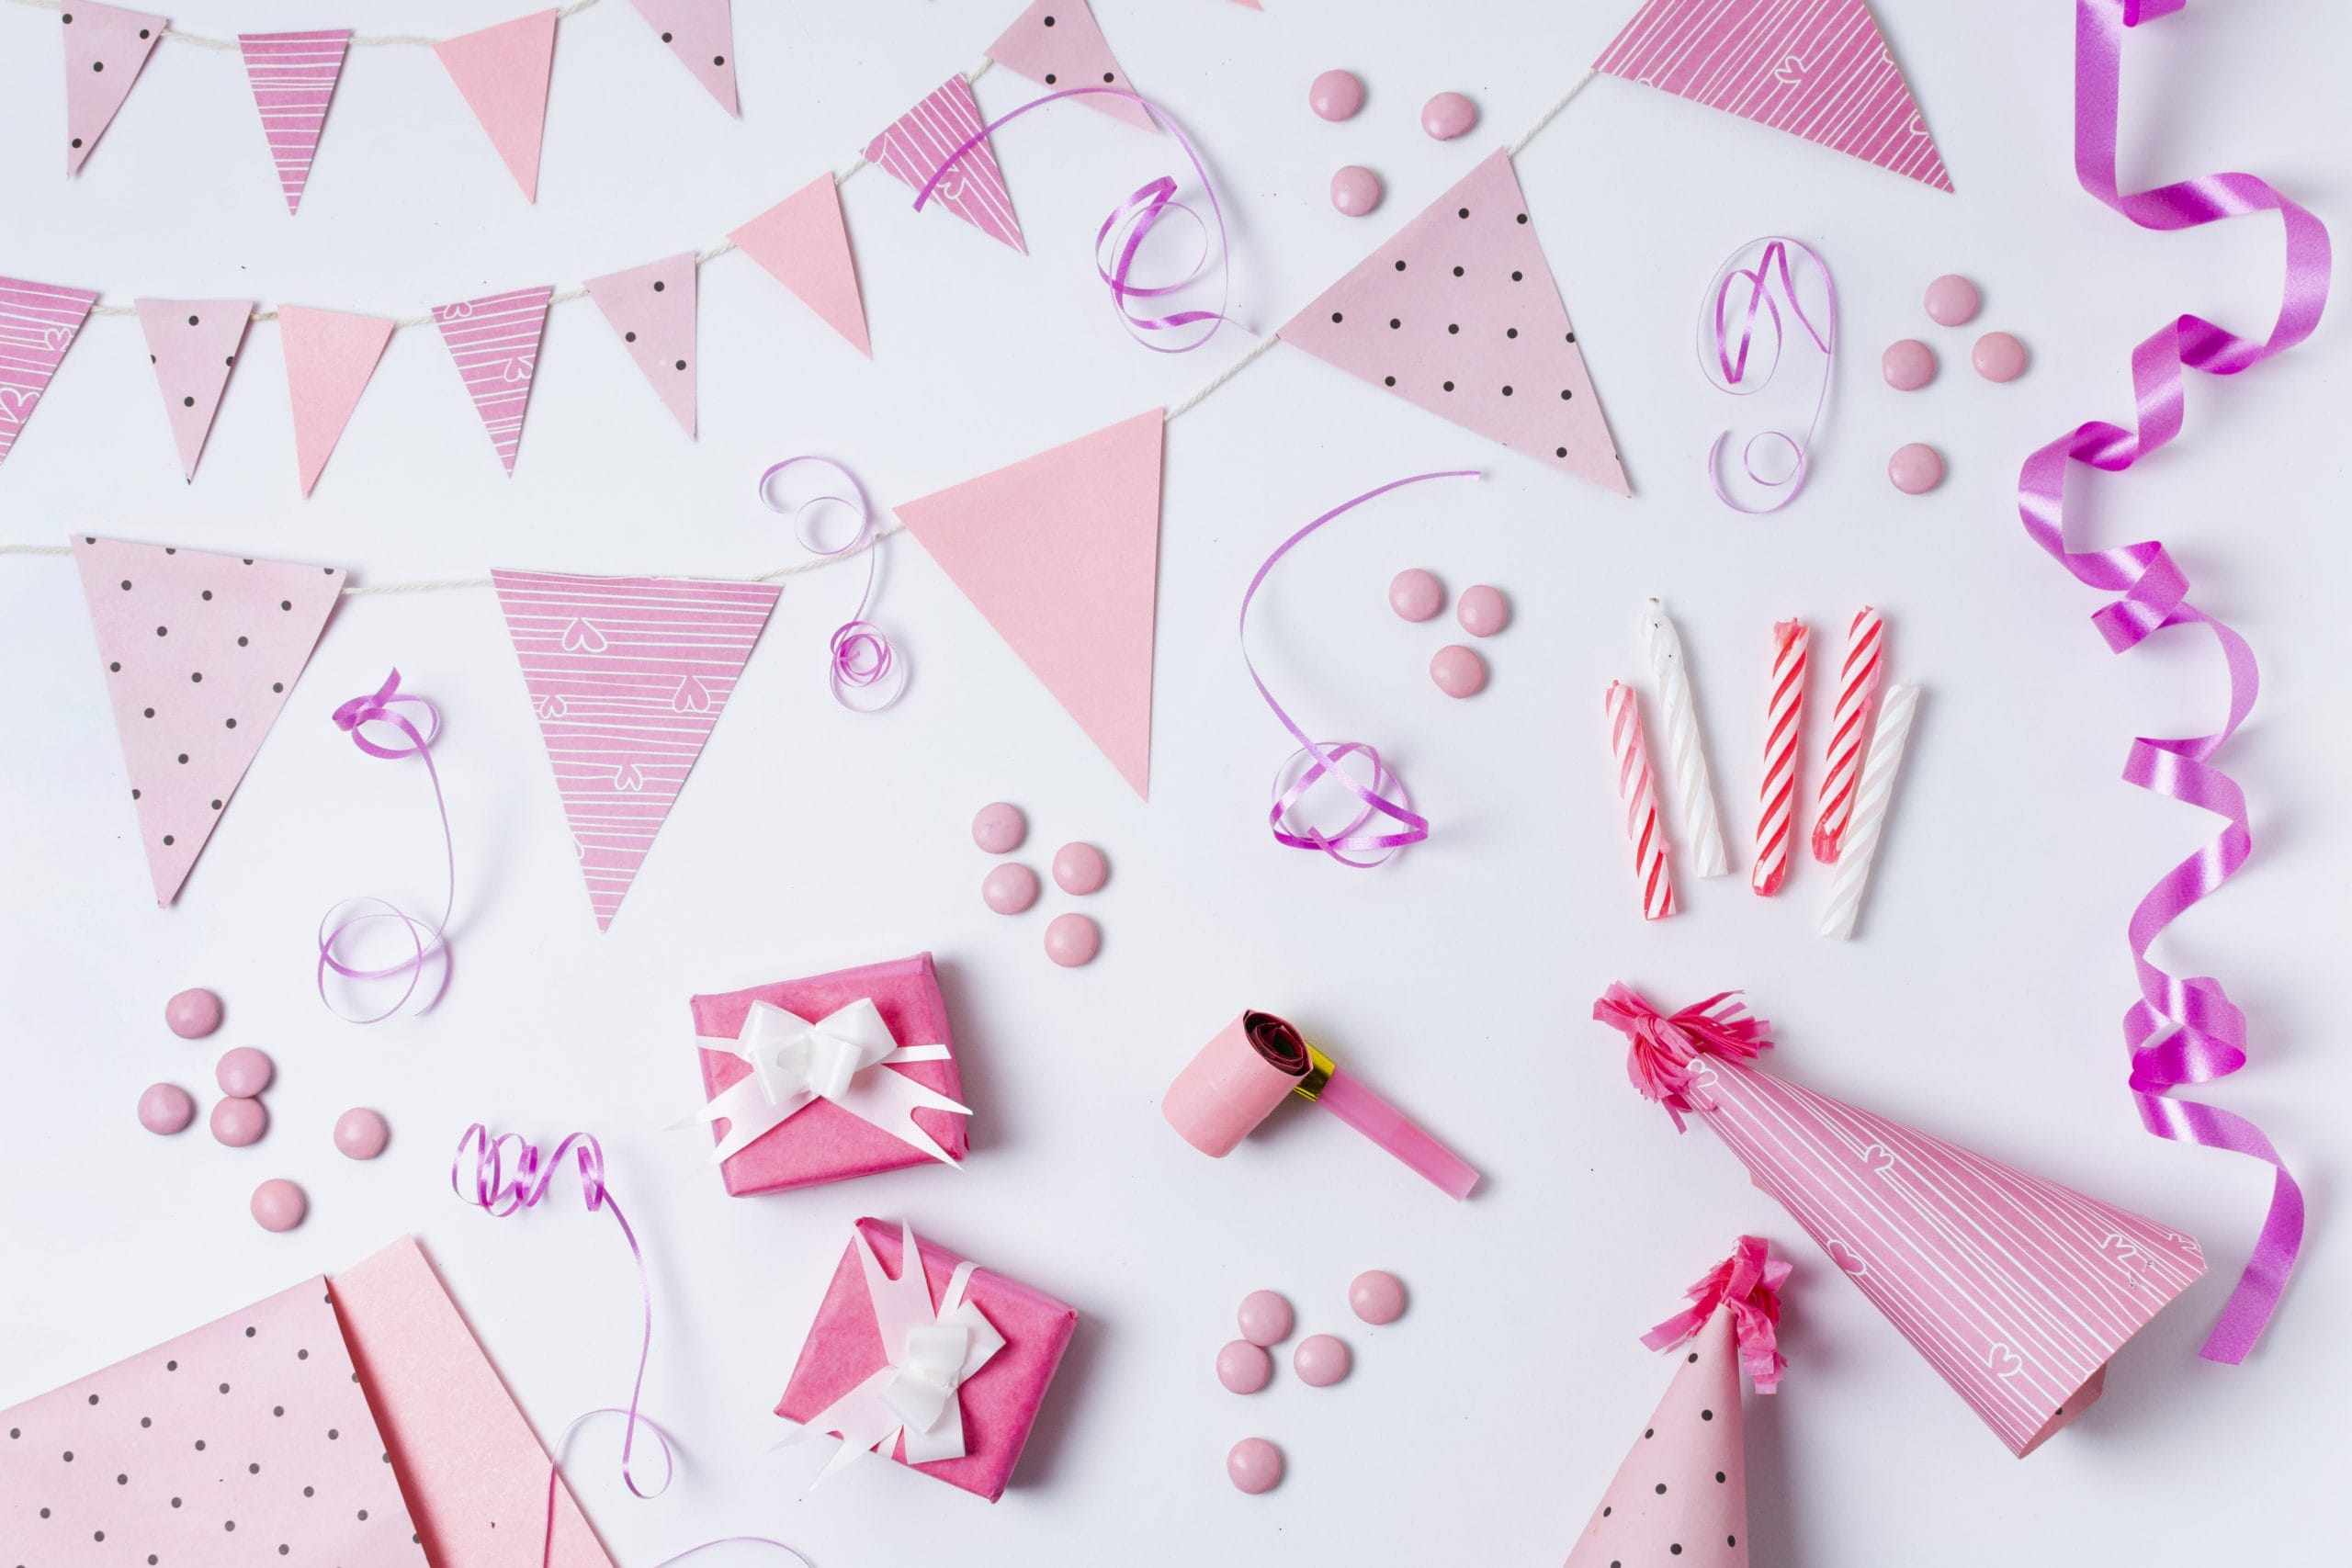 flat lay birthday decoration pink birthday decorations 5)Party Banners (Starting from $0.50)